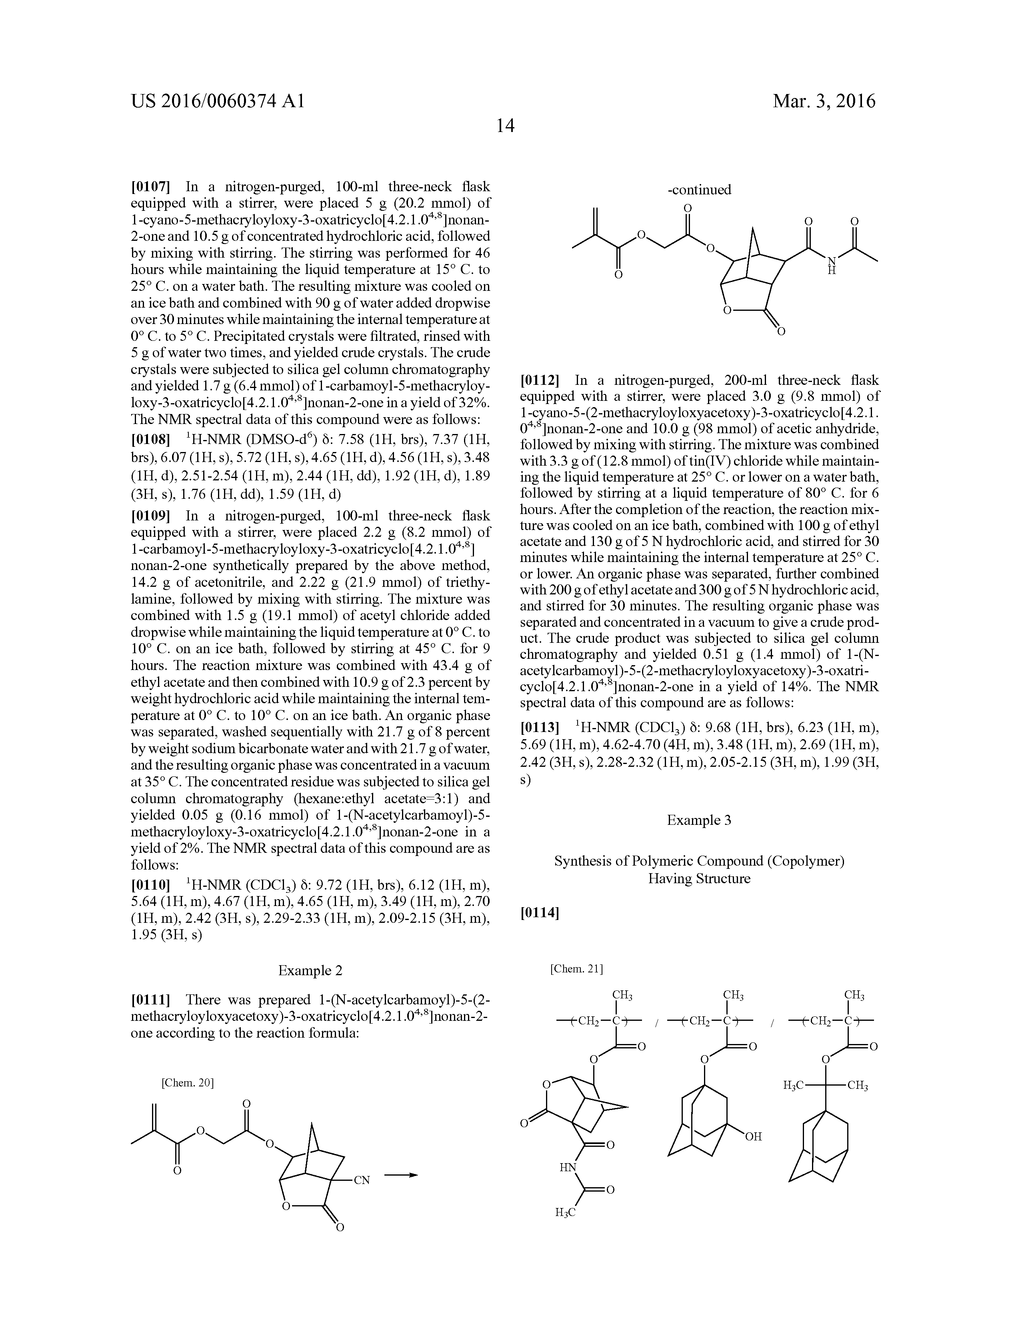 MONOMER HAVING N-ACYL CARBAMOYL GROUP AND LACTONE SKELETON, AND POLYMERIC     COMPOUND - diagram, schematic, and image 15